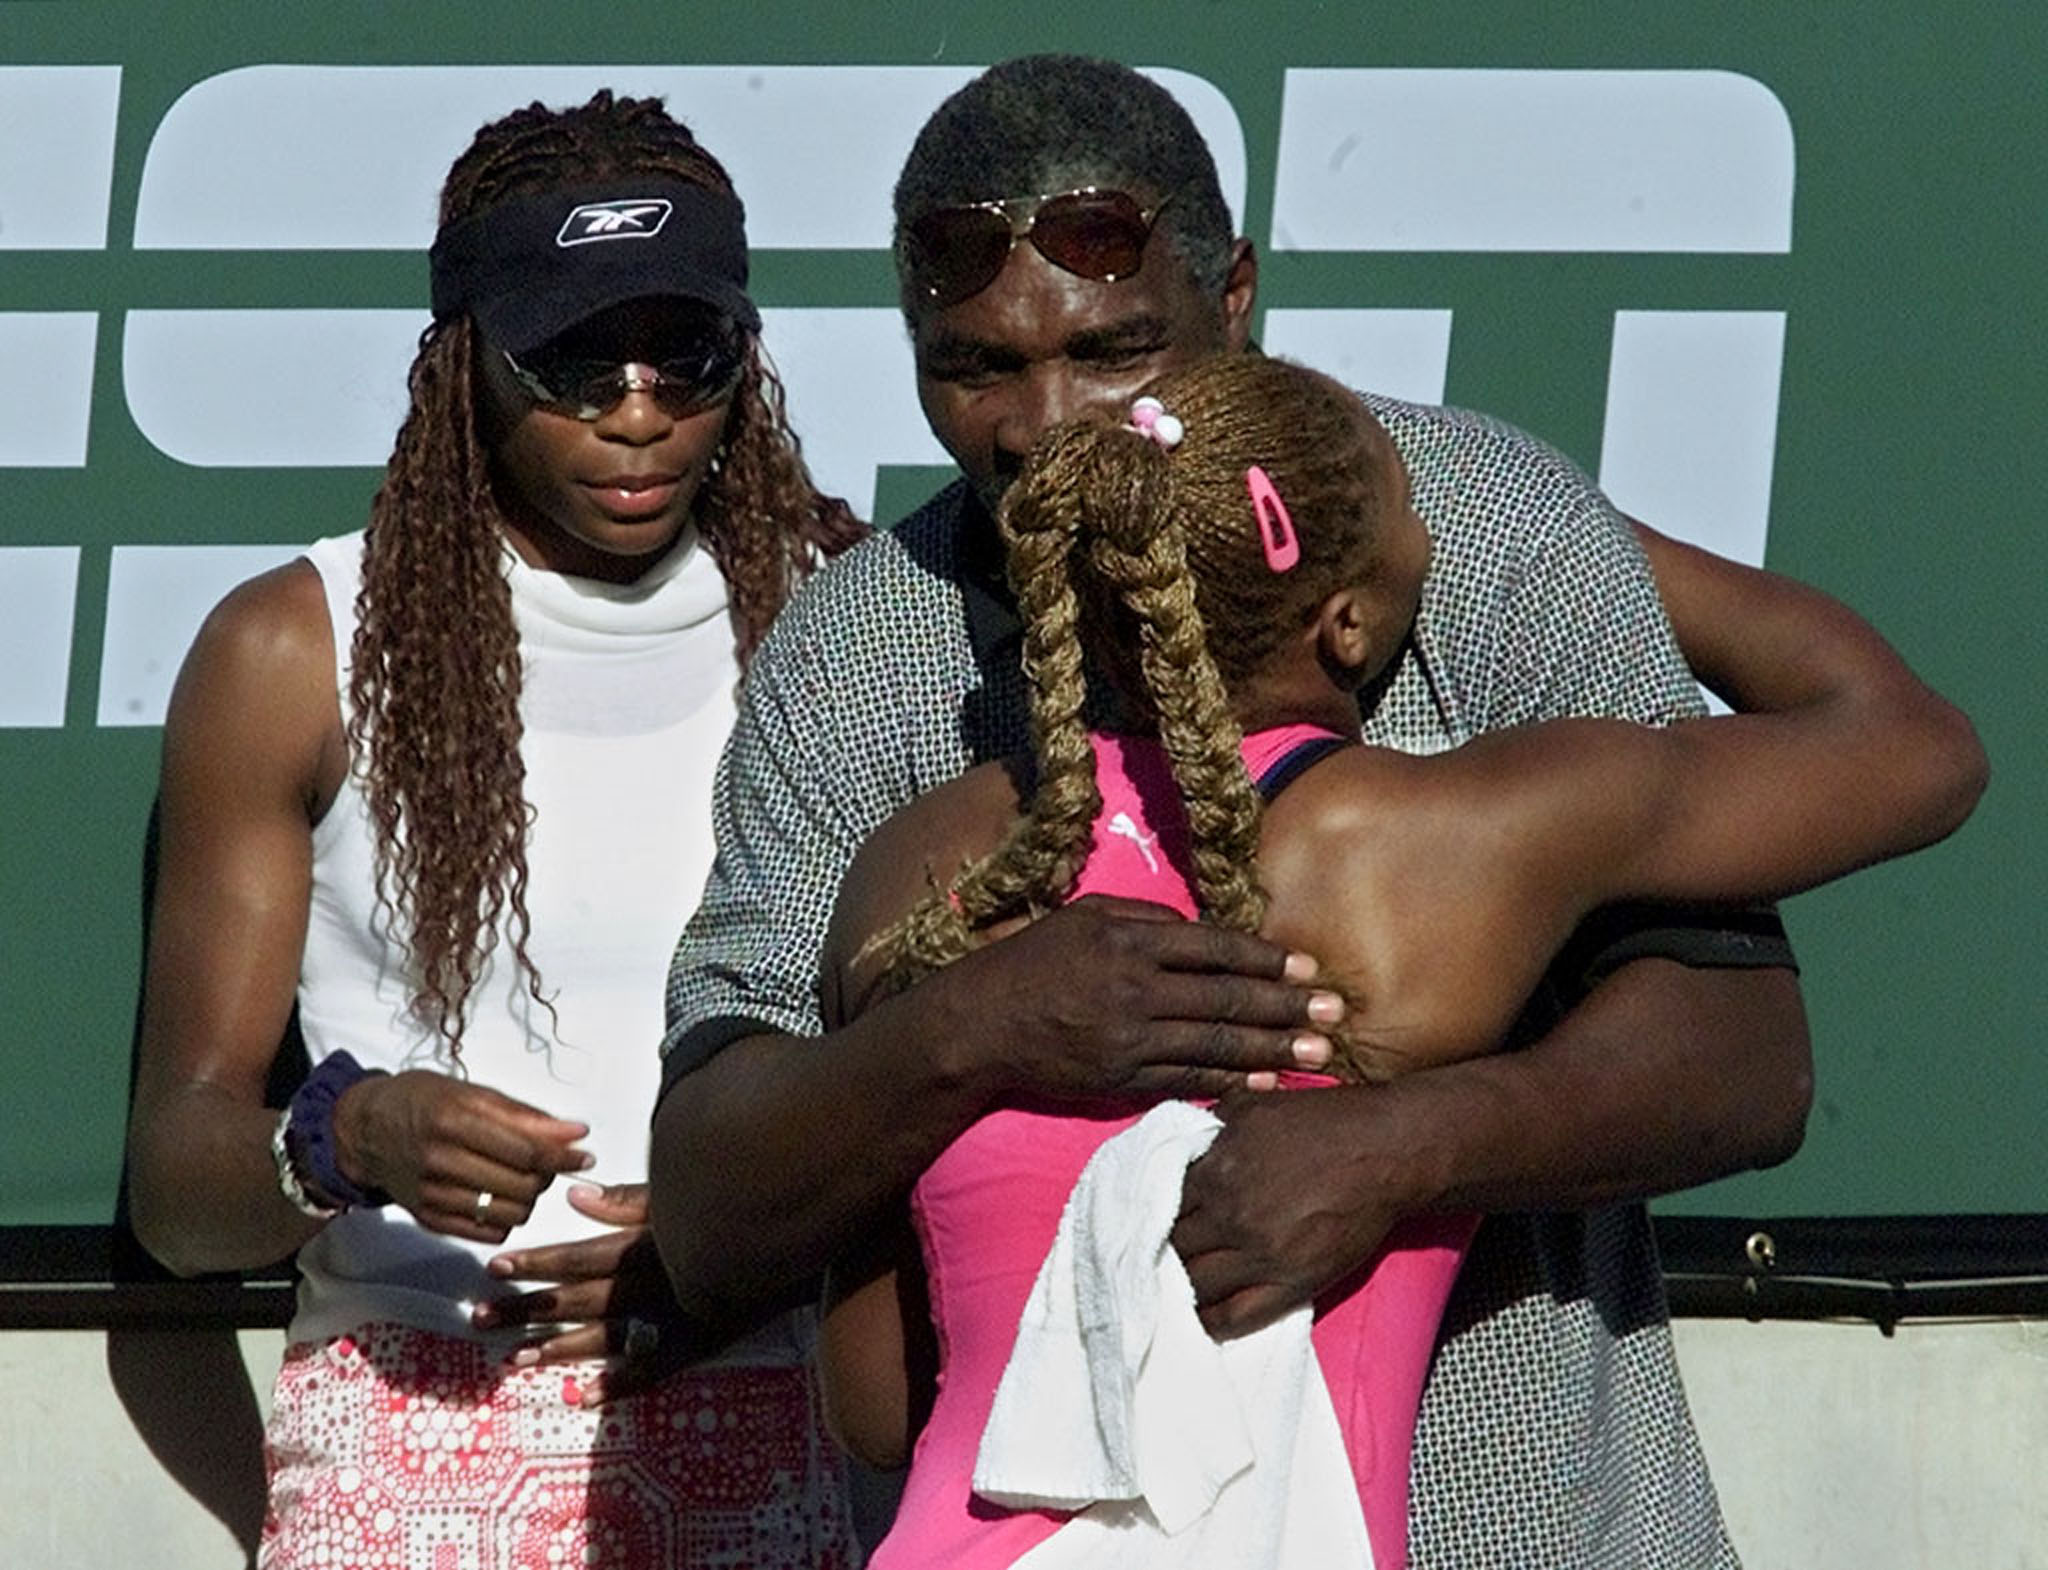 FILE PHOTO: Serena Williams of the United States (R) is hugged by her father Richard (top right) as sister Venus Williams waits her turn following Serena's 4-6 6-4 6-2 victory [over Kim Clijsters of Belgium] in the women's final match March 17, 2001 at the Tennis Masters Series in Indian Wells, California . All three Williams' were 